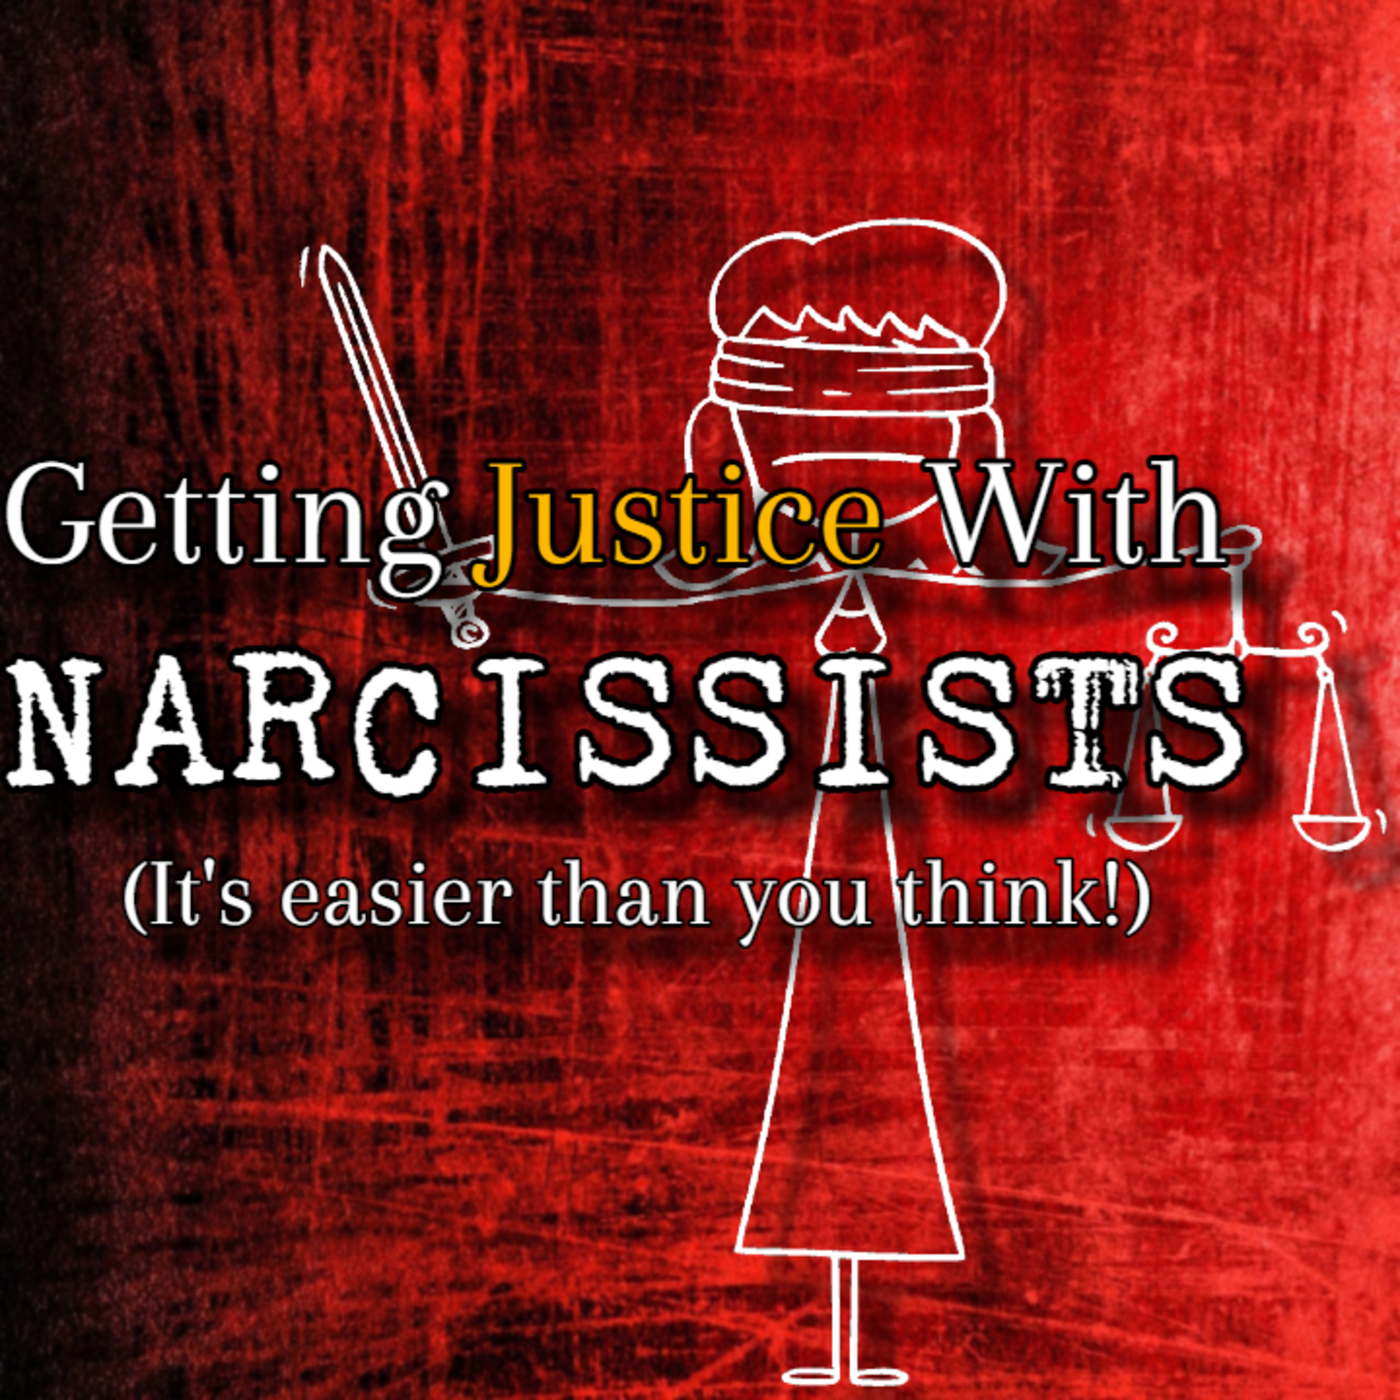 Episode 241: Getting Justice With Narcissists (It's Easier Than You Think!)